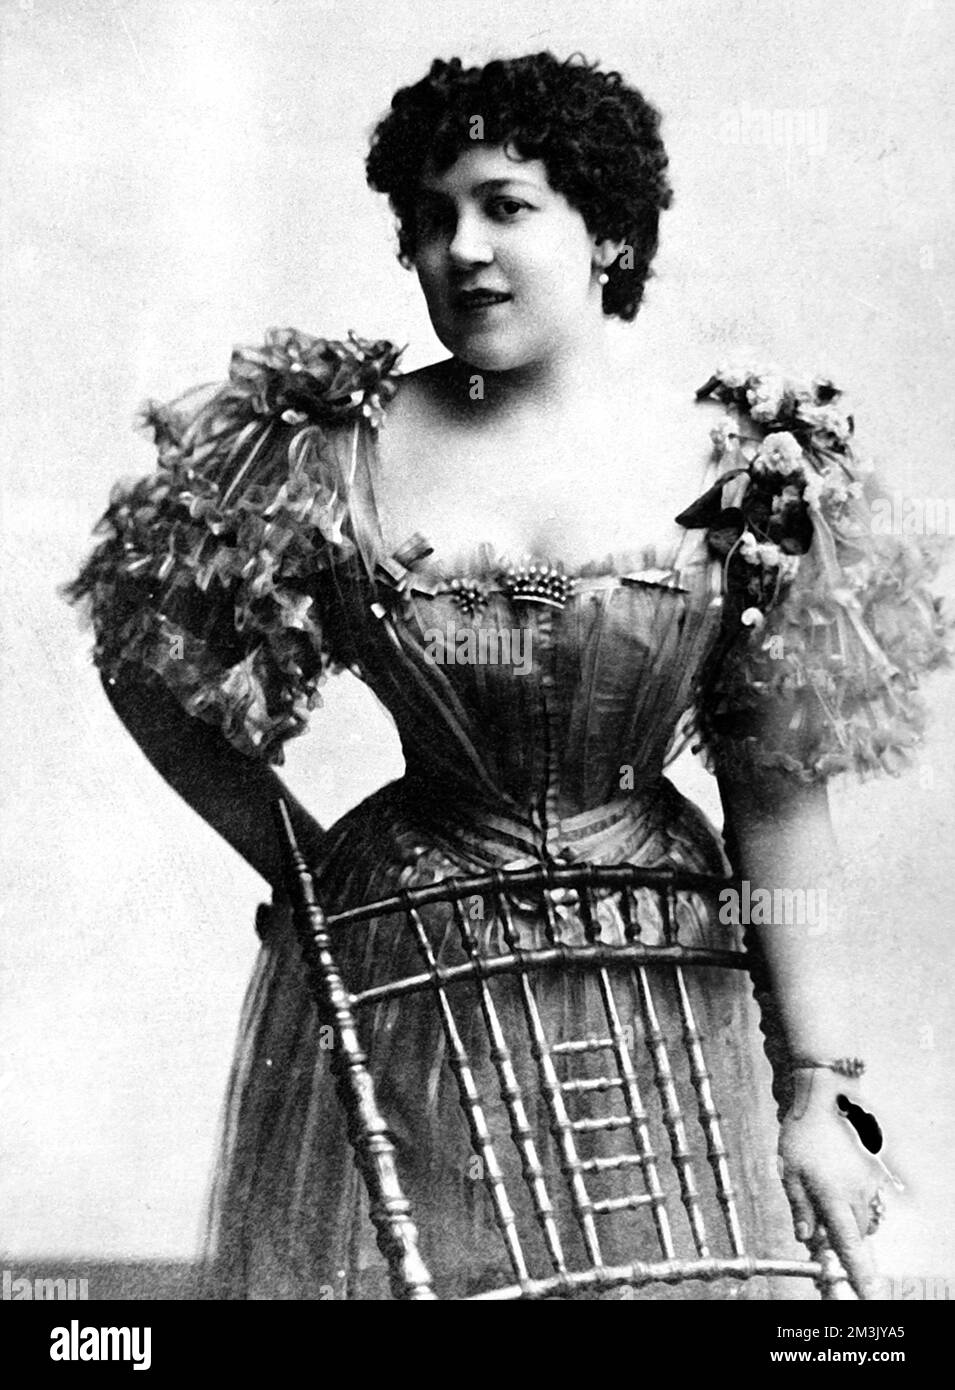 Belle Elmore, murdered wife of Dr Crippen.    Dr Crippen, an American citizen, lived at 39 Hilldrop Cresent, Camden, London. He was accused of murdering his wife when she disappeared under suspicious circumstances. Crippen had told friends that his wife, Belle Elmore had died due to illness,  but when first questioned by police he told them she had eloped with a lover.      The police returned to Hilldrop Cresent to question Crippen a second time only to discover that he and his mistress, Miss Le Neve had disappeared. Detectives searched around the house and uncovered a headless body in the ce Stock Photo